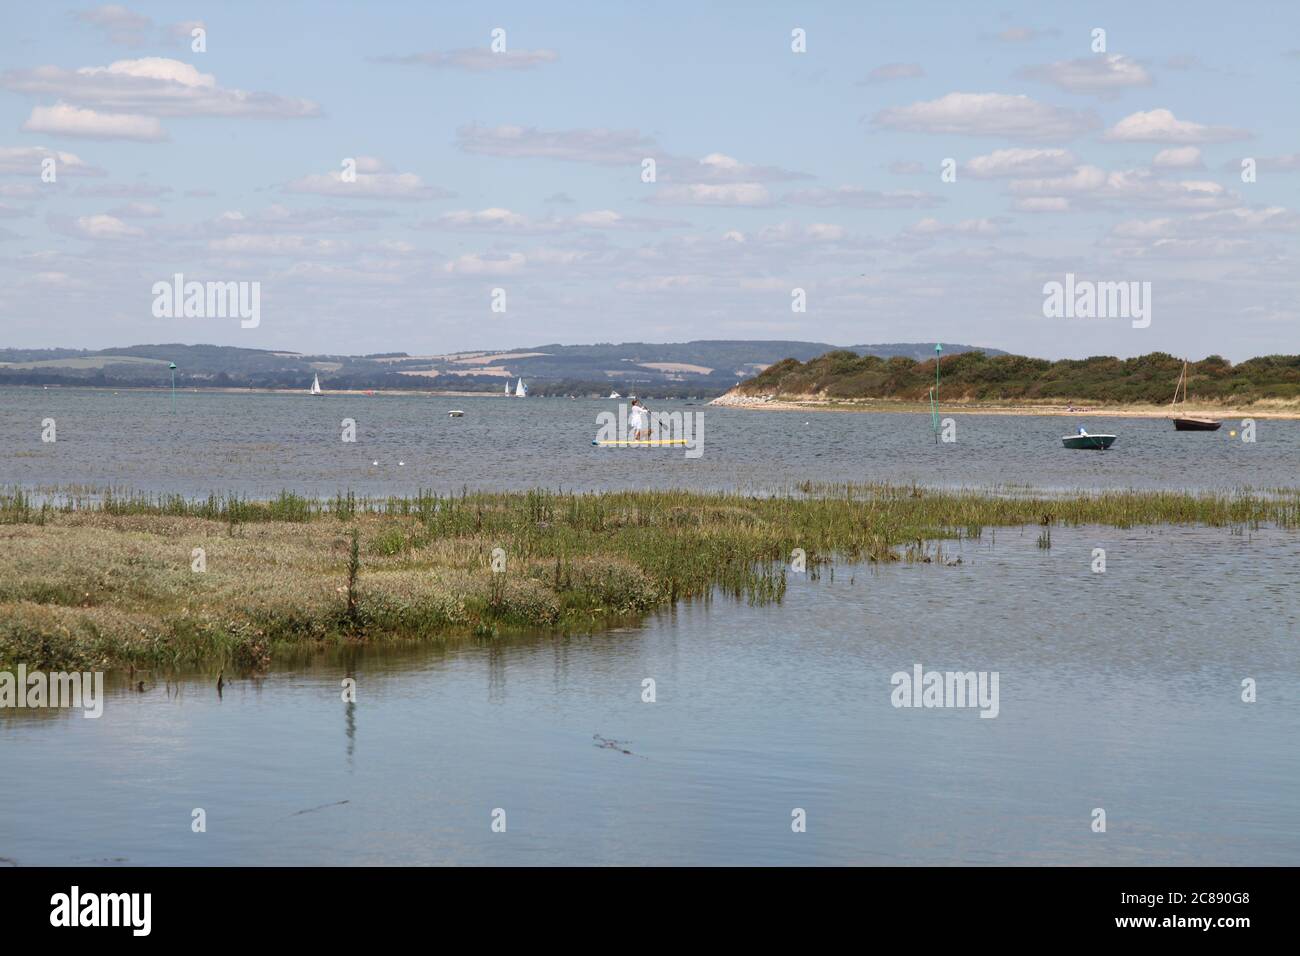 Snowhill Creek on a fair weather day, West Wittering, Chichester, UK, July 2020 Stock Photo